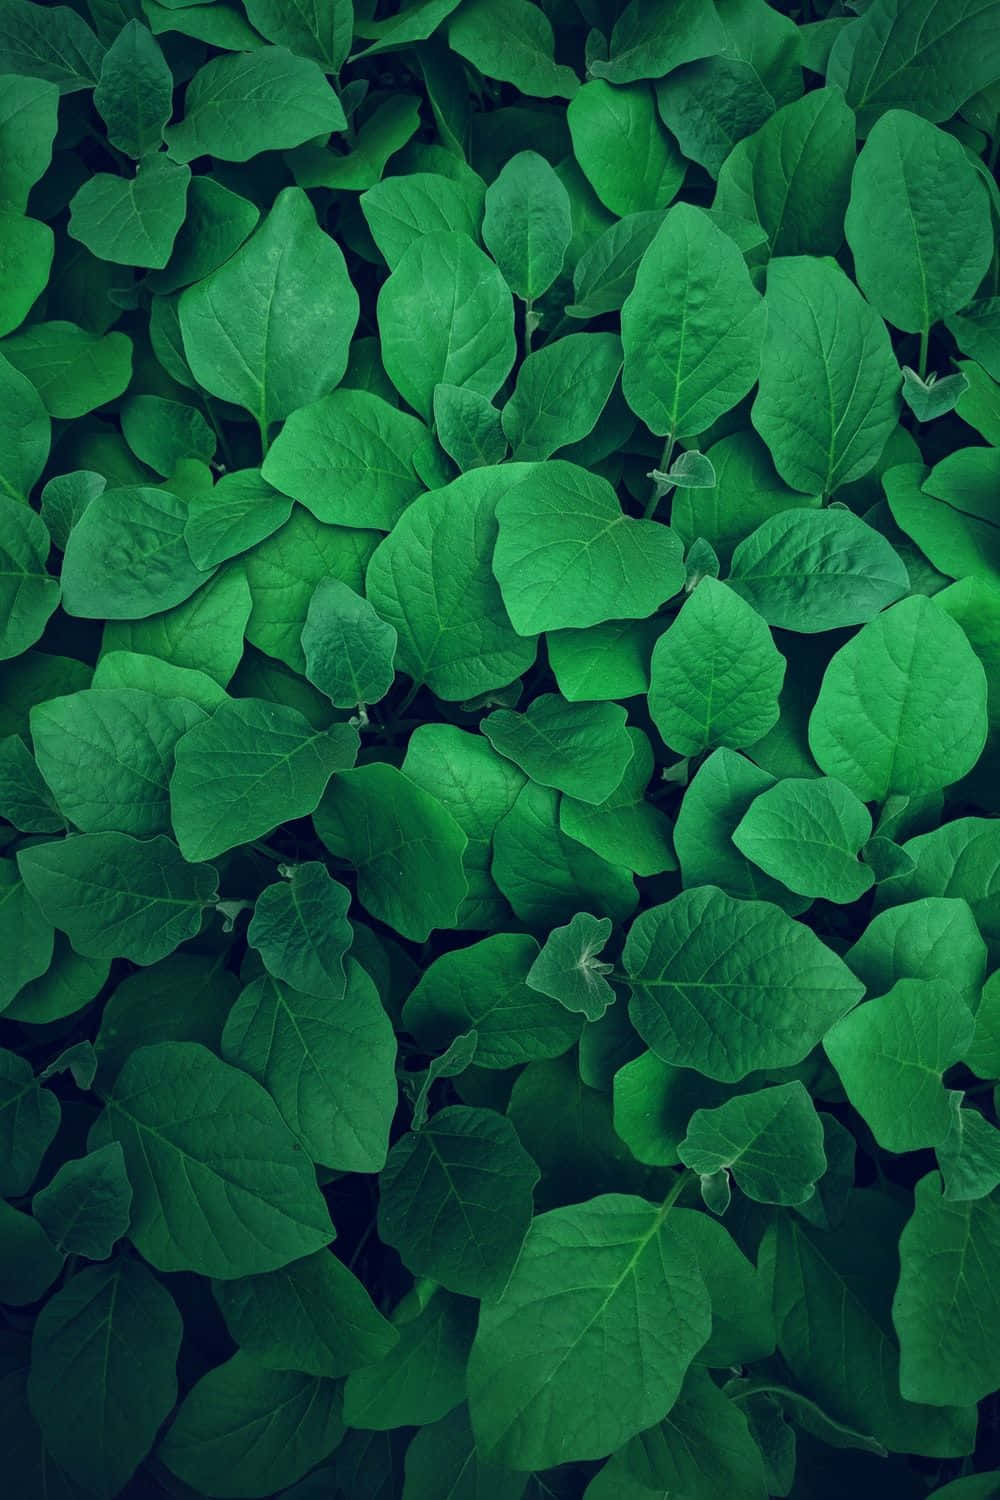 Verdant Canopy - A Close View Of Green Leaves